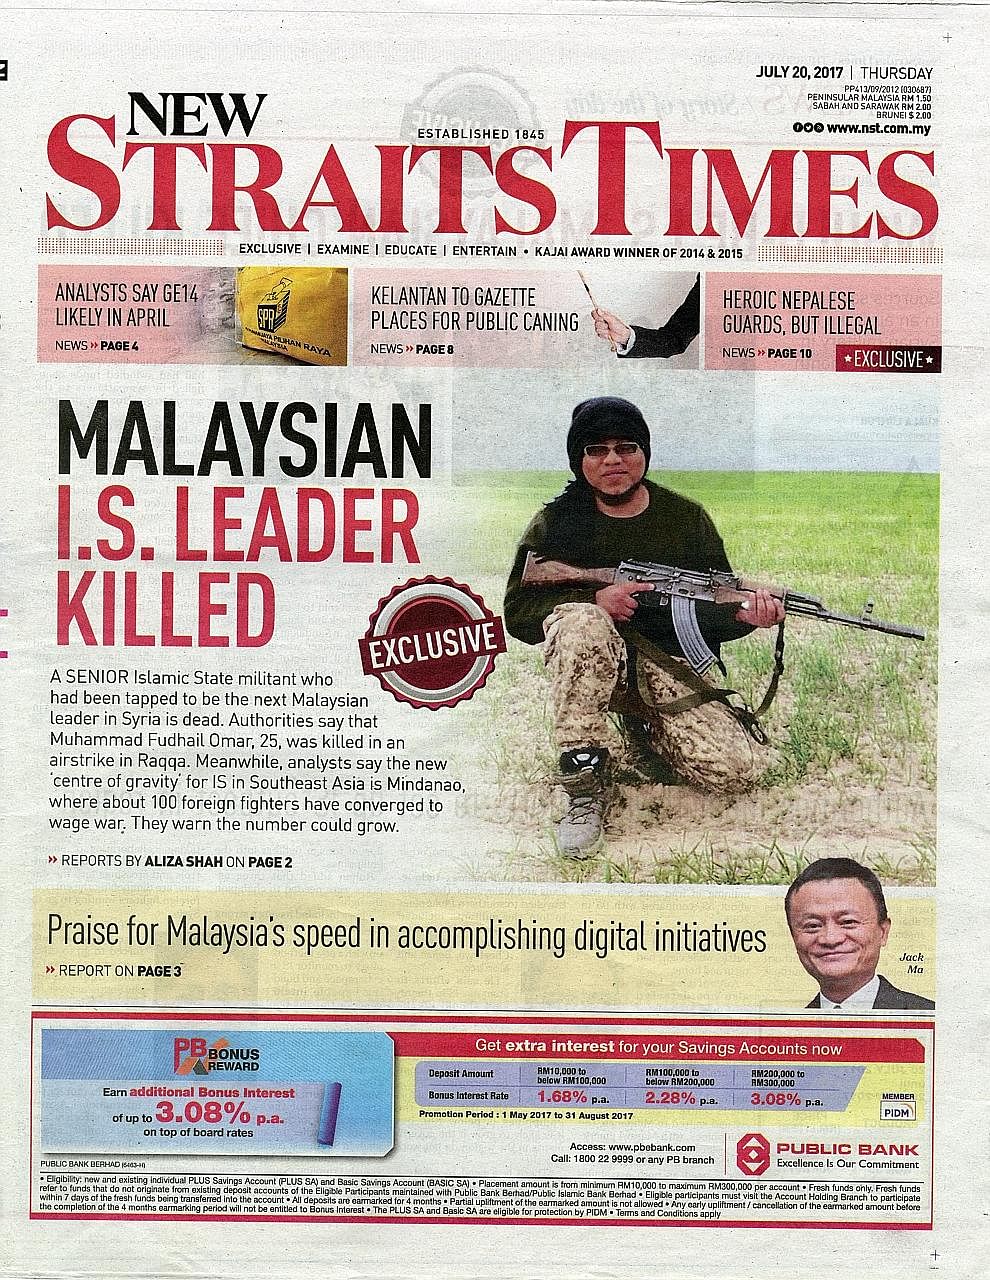 Fudhail's death was front-page news in yesterday's New Straits Times. According to the report, Fudhail joined ISIS in Syria in late 2014, where he taught the children of ISIS members Quran recitation, and guarded security posts. He also spread the gr